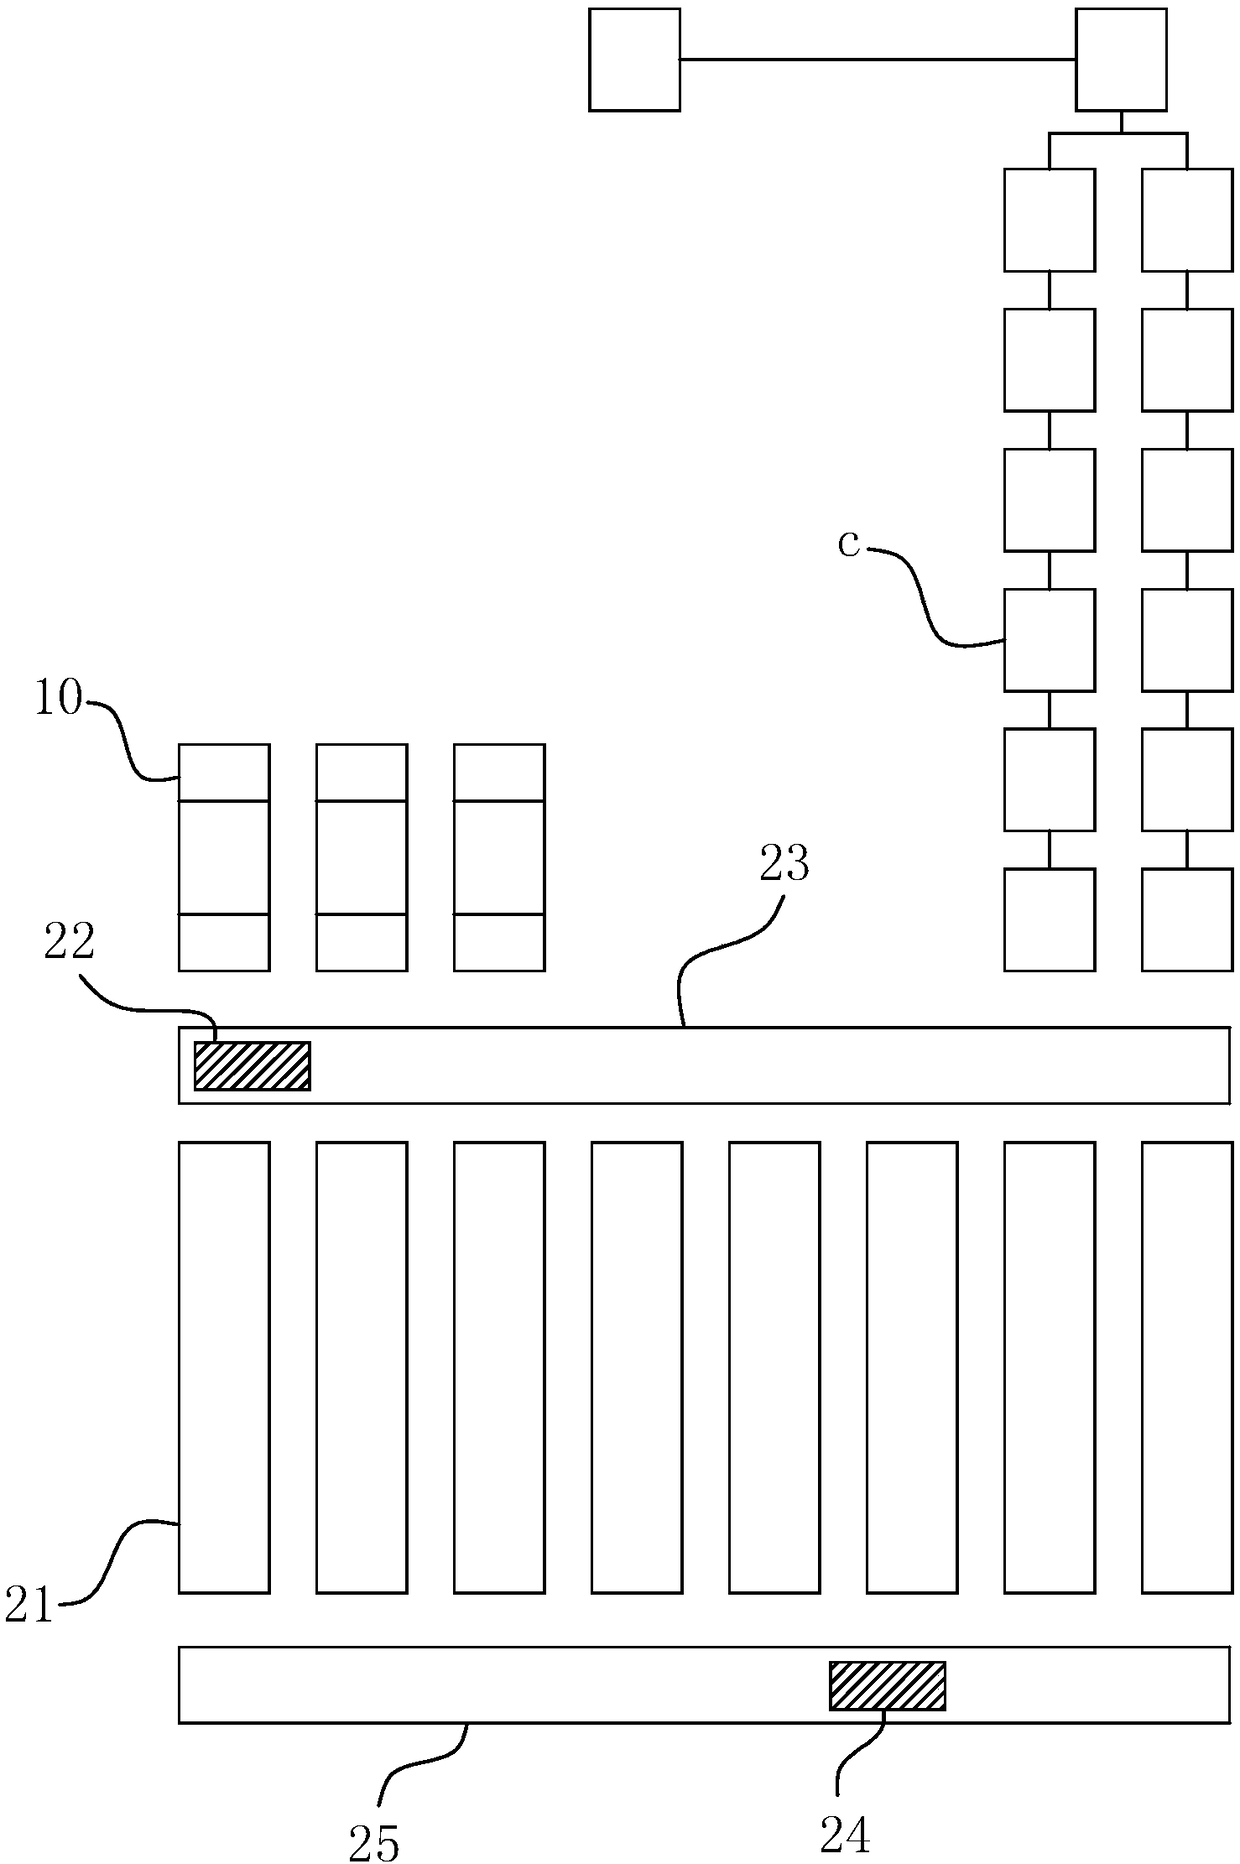 Full-automatic intelligent logistics system and method used for carton production